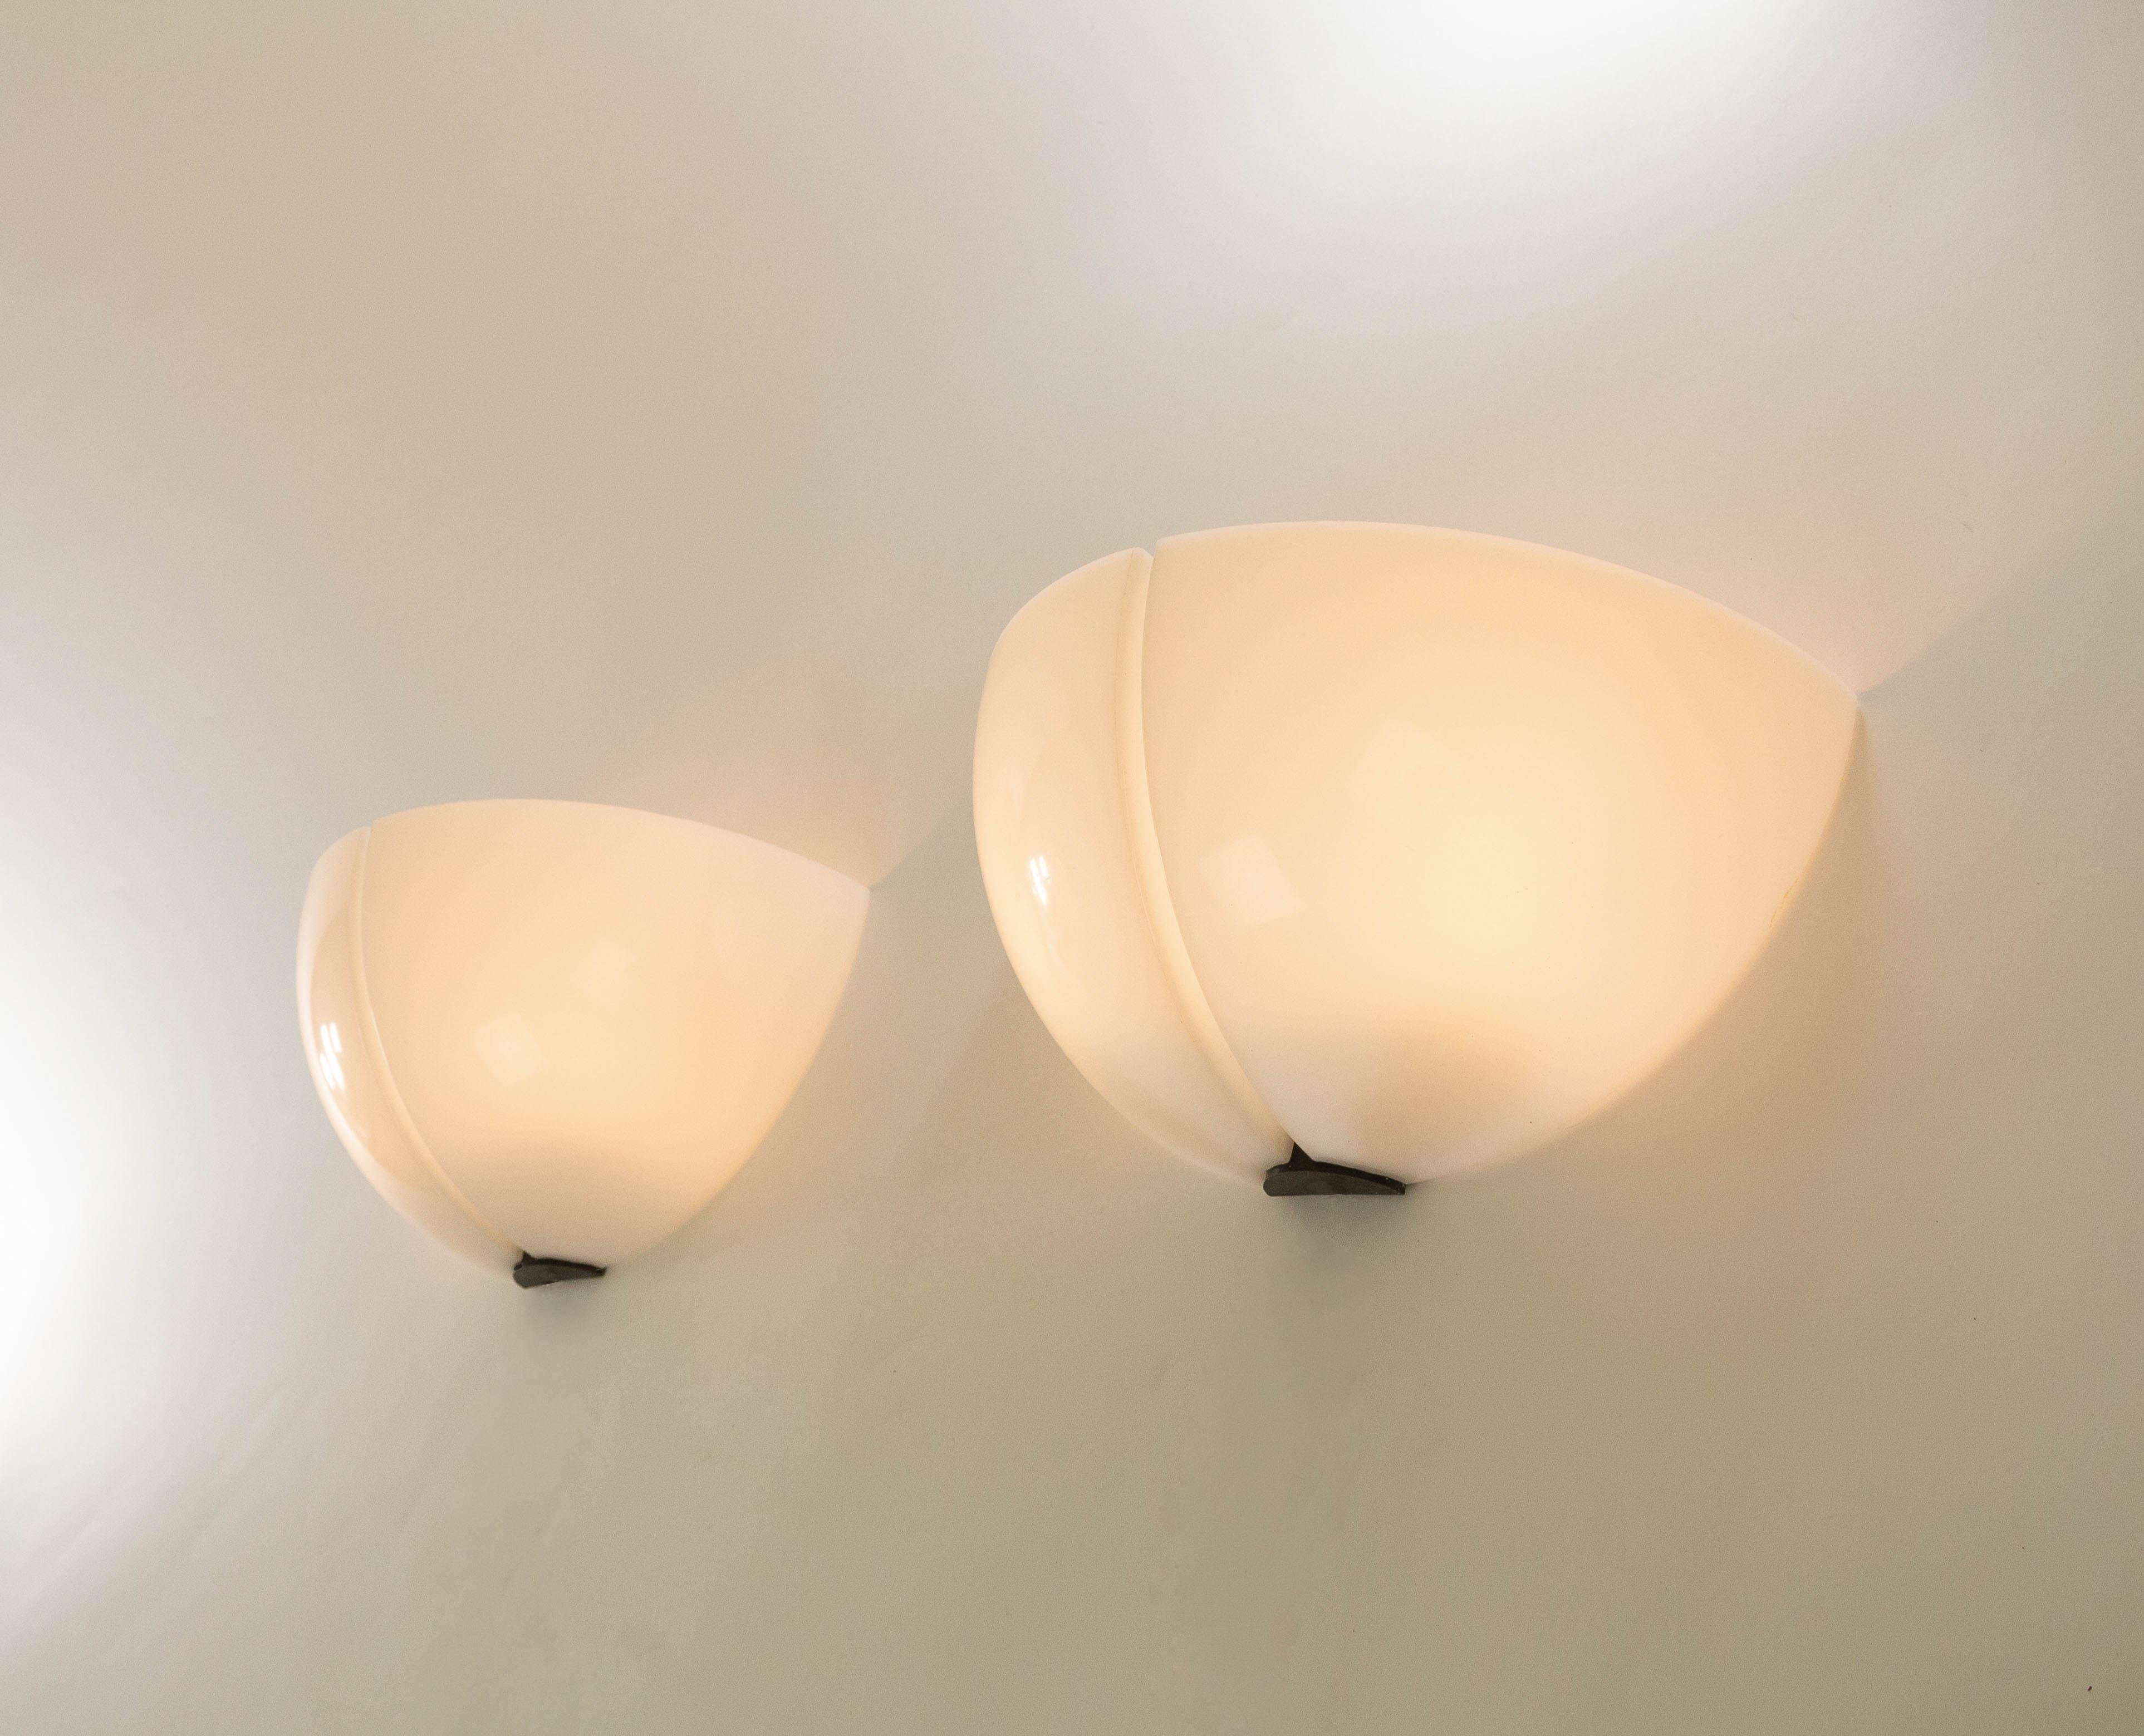 A pair of Spicchio wall lamps designed by Danilo and Corrado Aroldi and manufactured by Stilnovo in 1972.

Danilo and Corrado Aroldi designed a whole range of Spicchio lamps for Stilnovo. In our archive we found 3 different wall lamps, 2 pendants, a